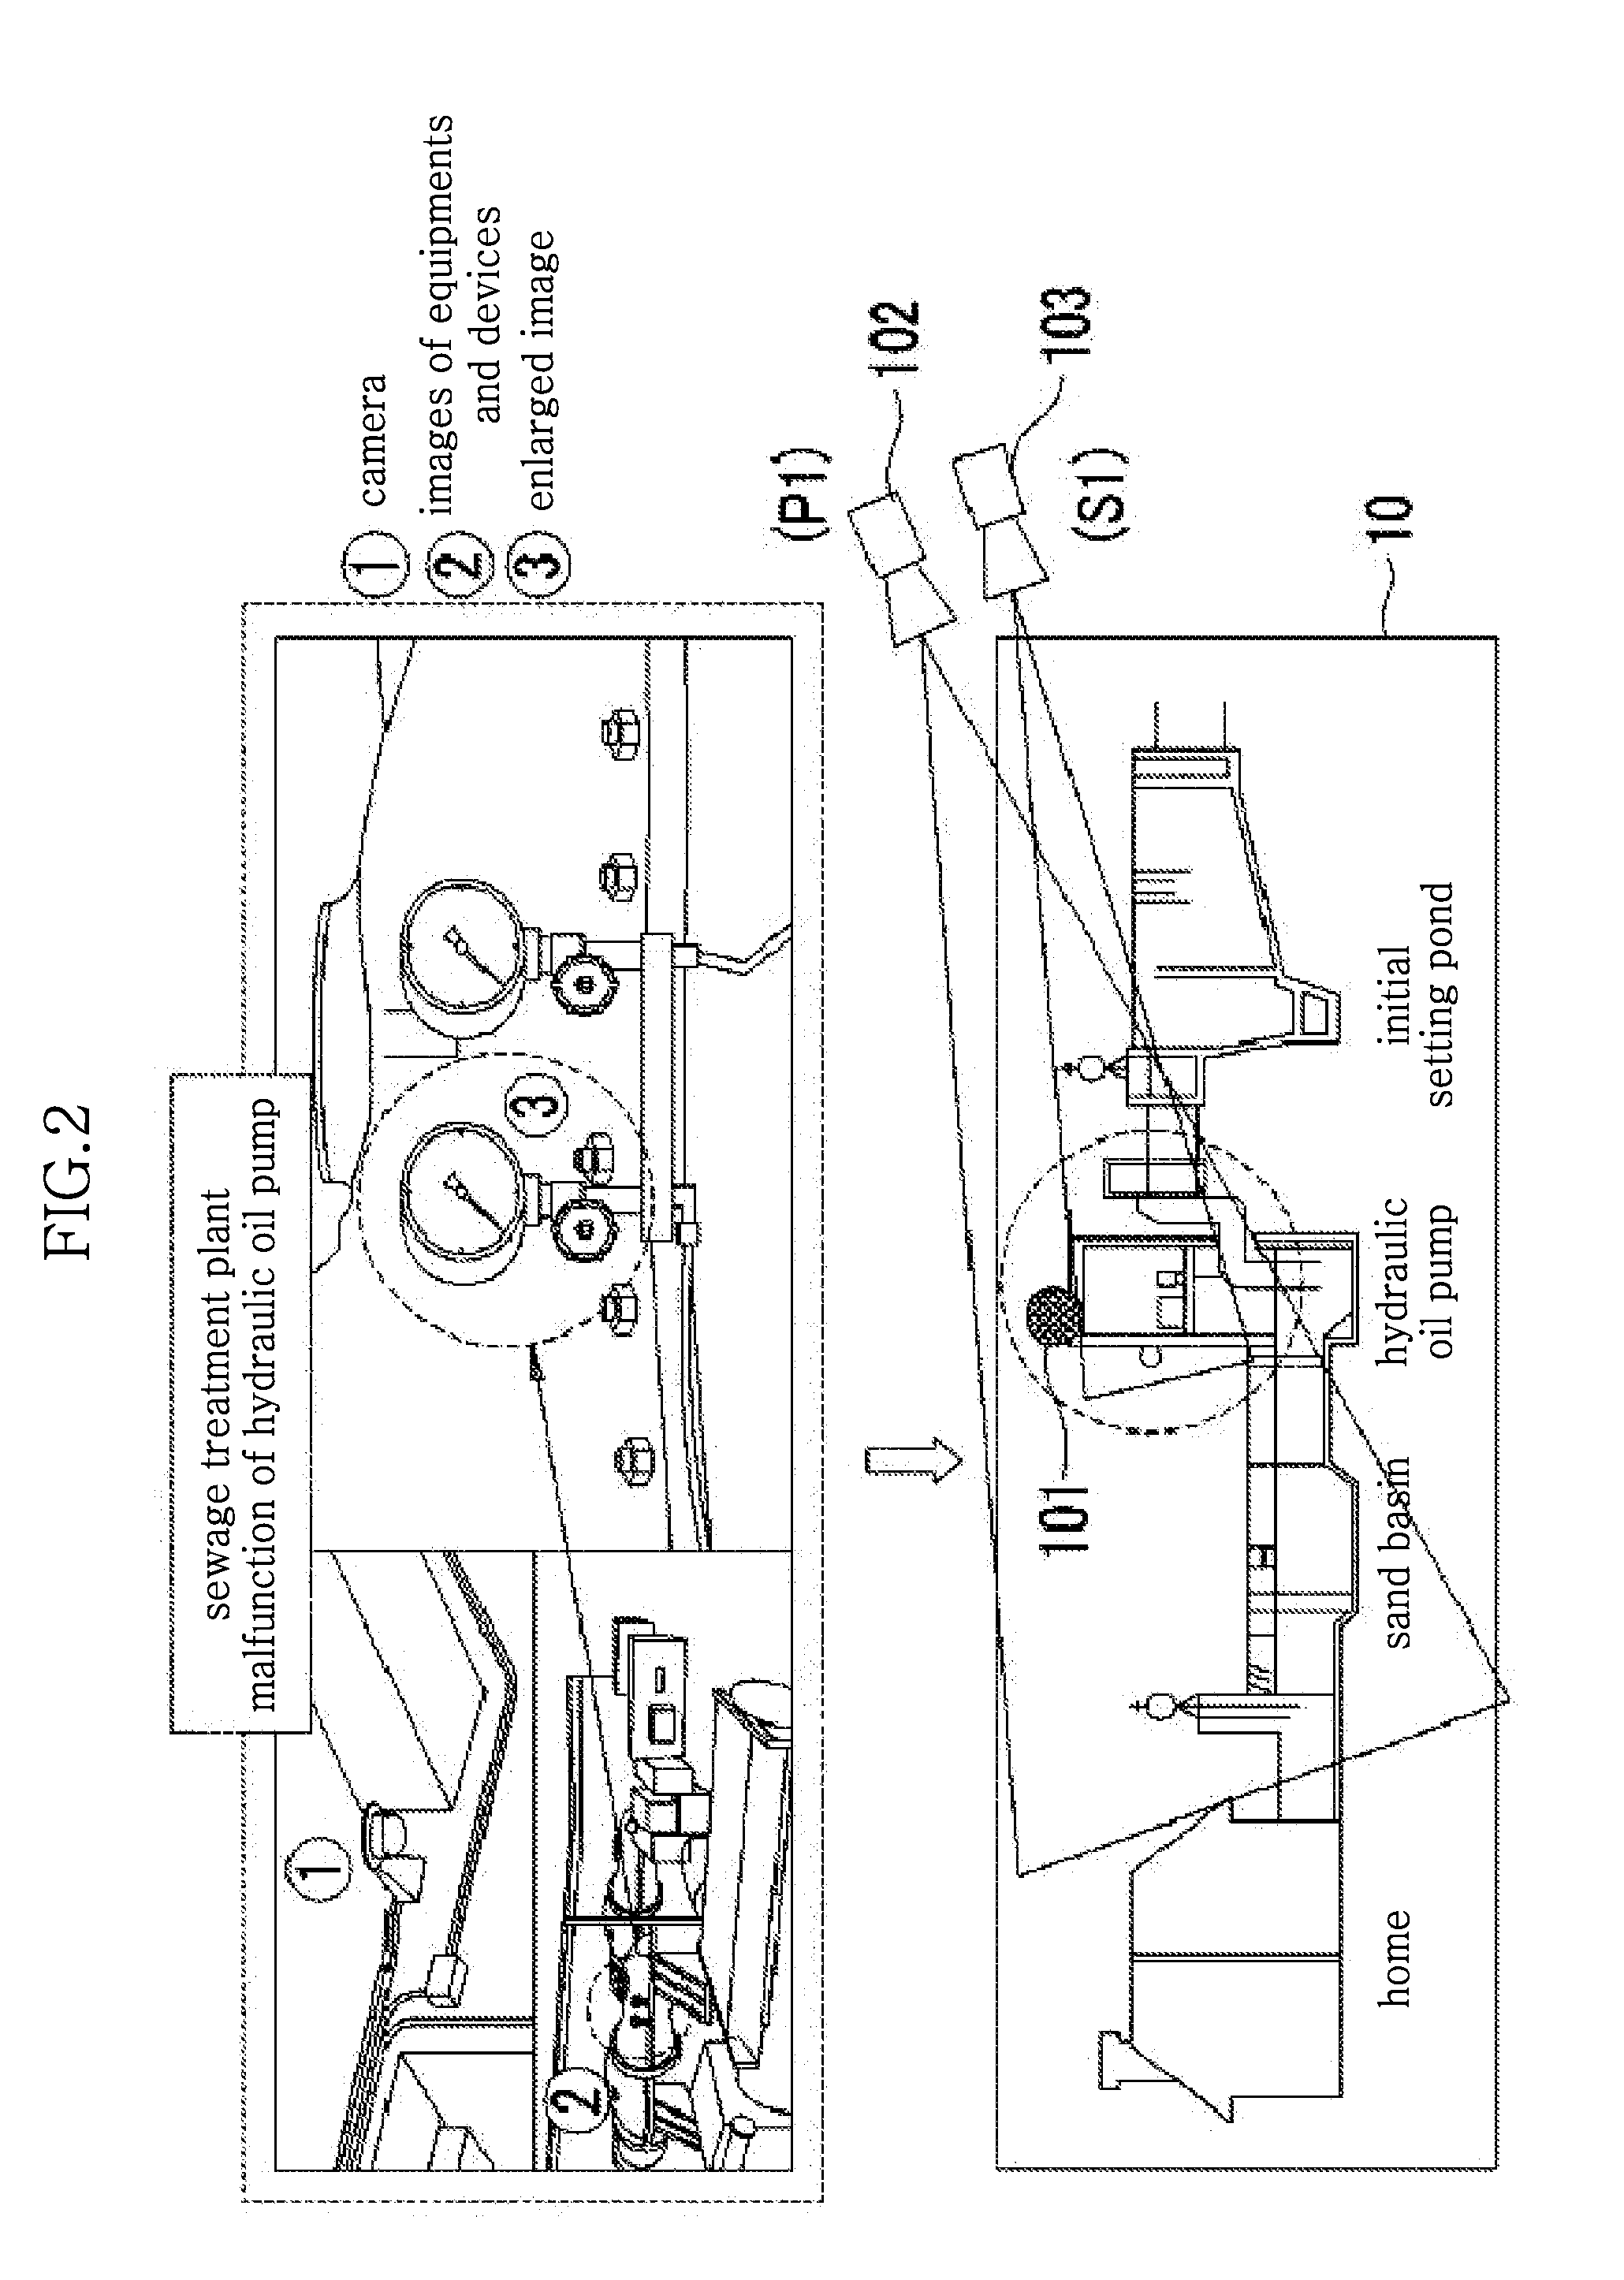 Integrated control system for facilities using a local area data collecting and recording device